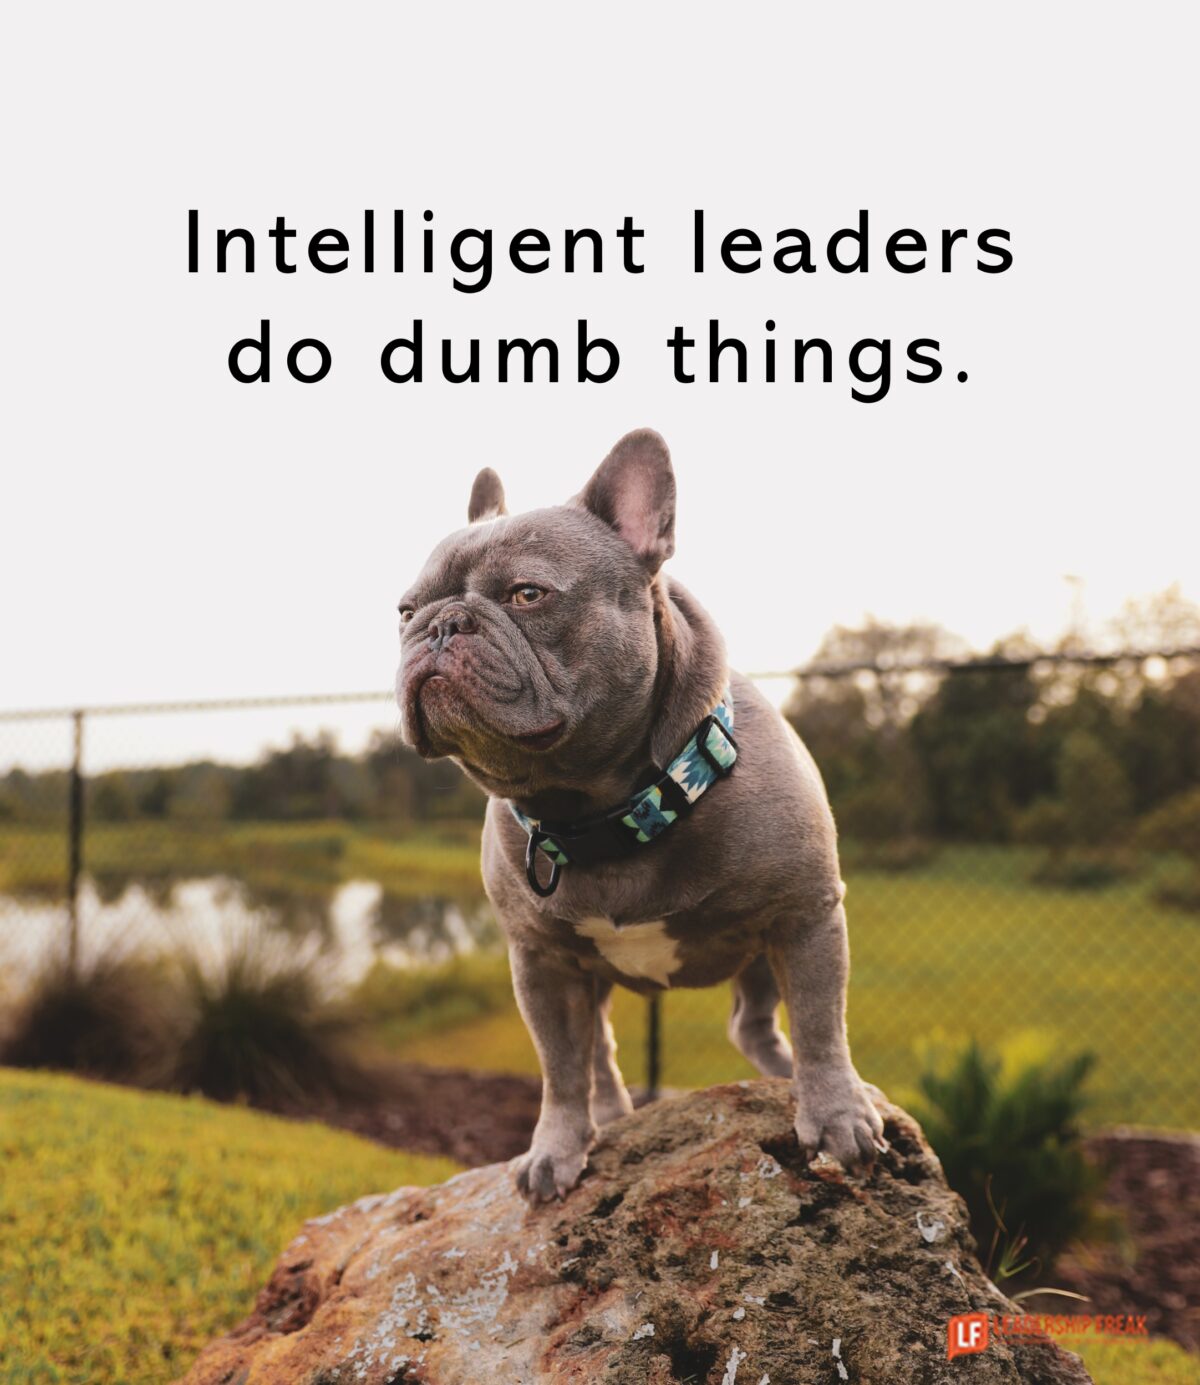 20 Dangerous Traps Intelligent Leaders Stumble into by Accident